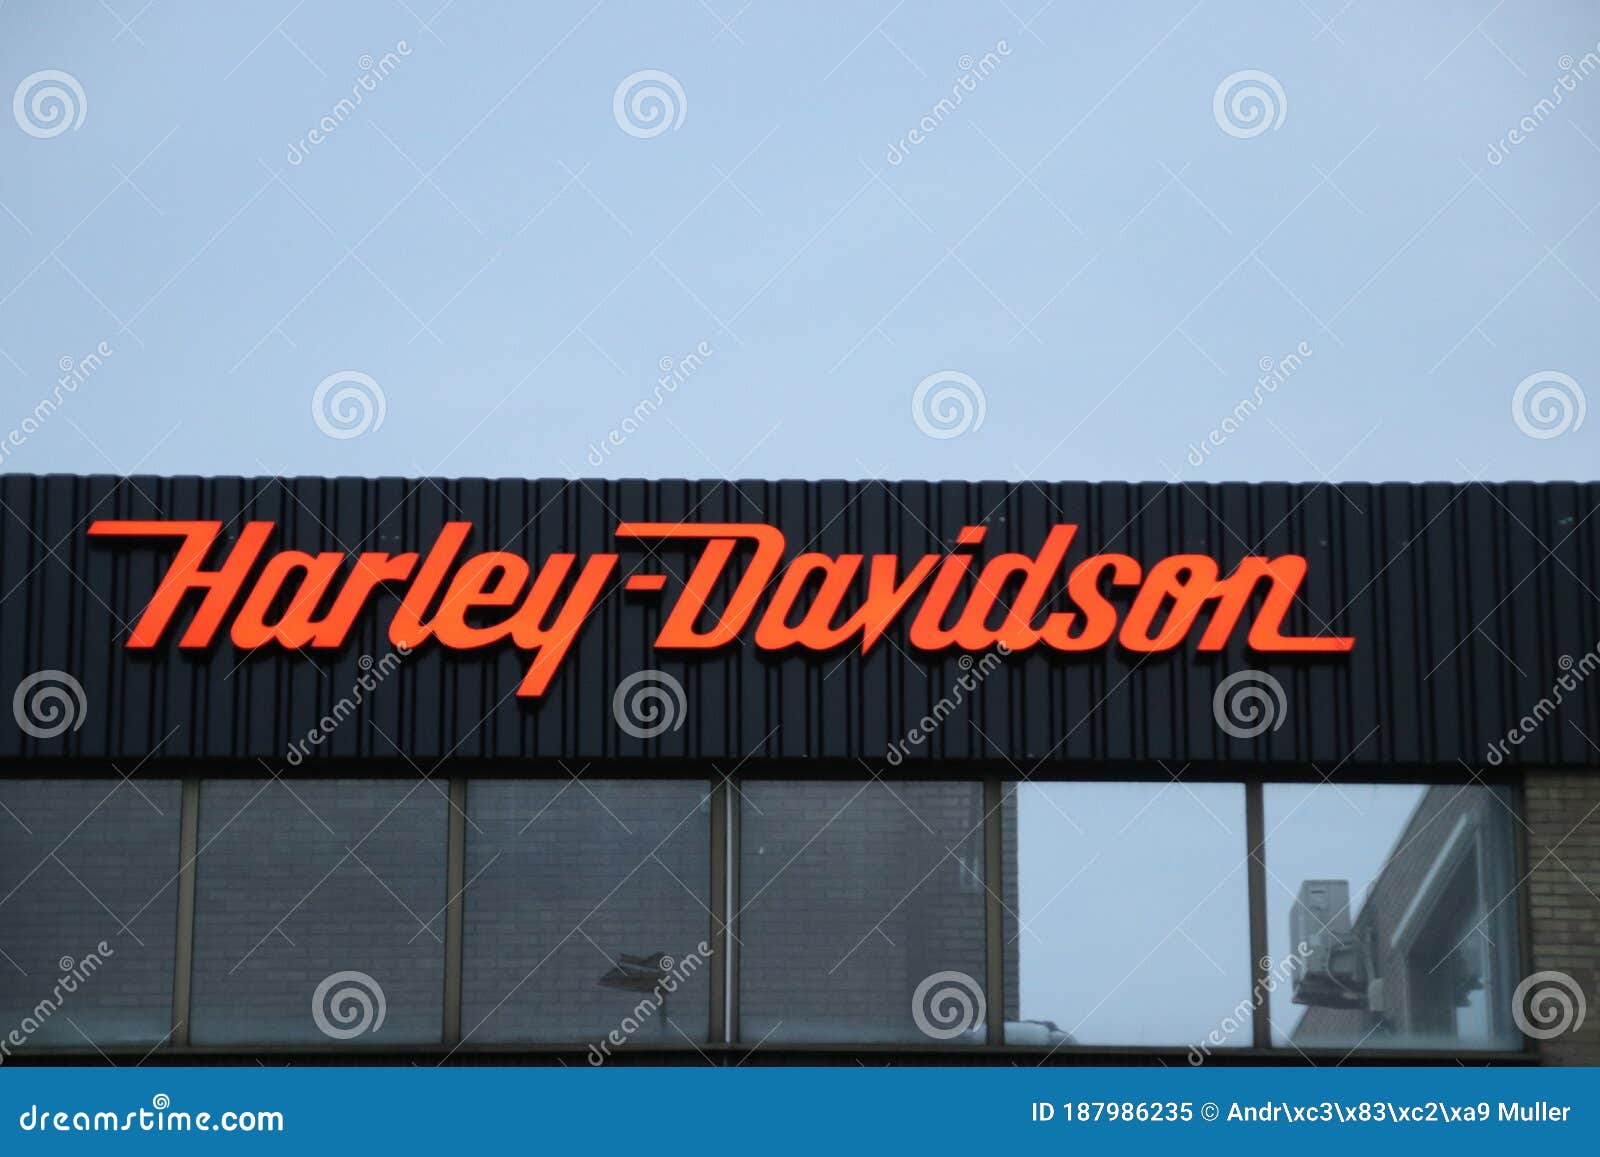 Logo On The Wall From The Motorcycle Brand Harley Davidson ...